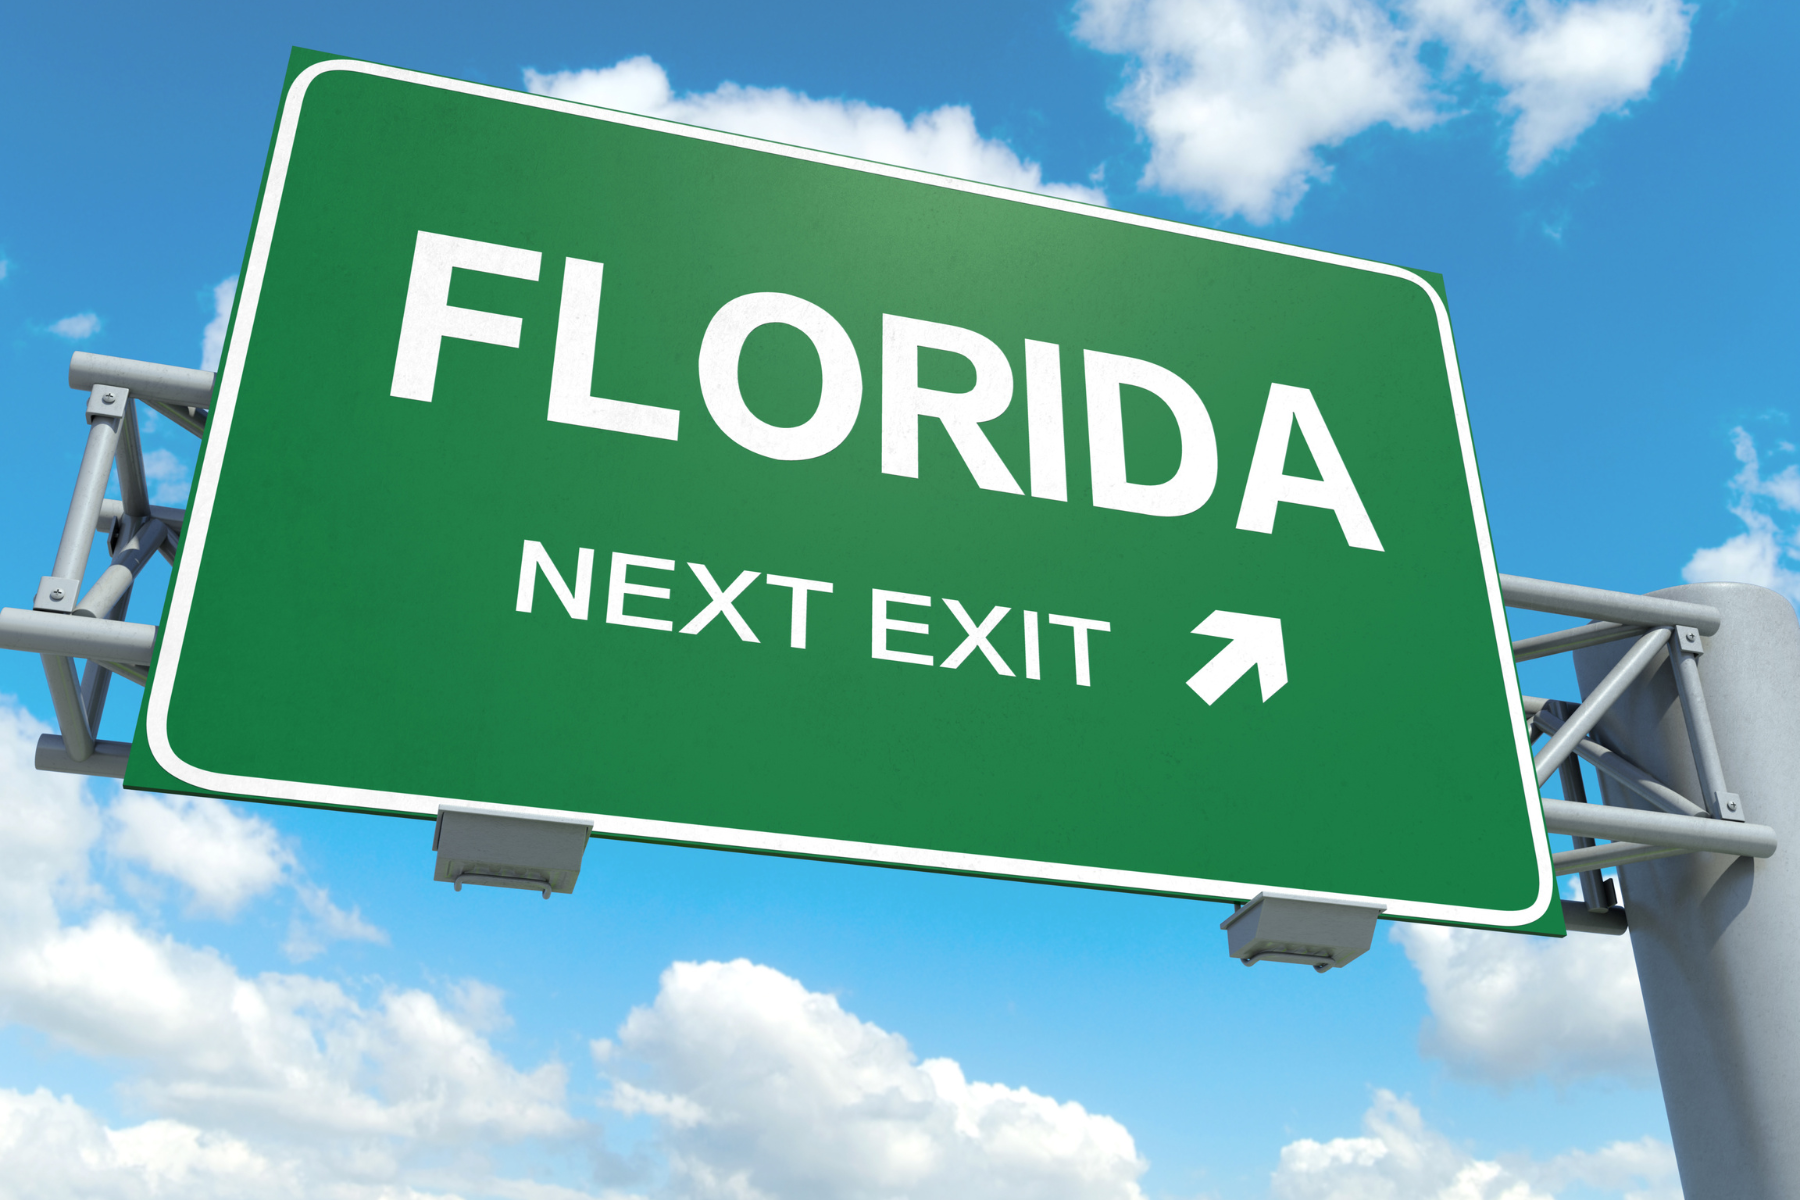 Snowbirds Are Flocking to Florida Vacation Homes!